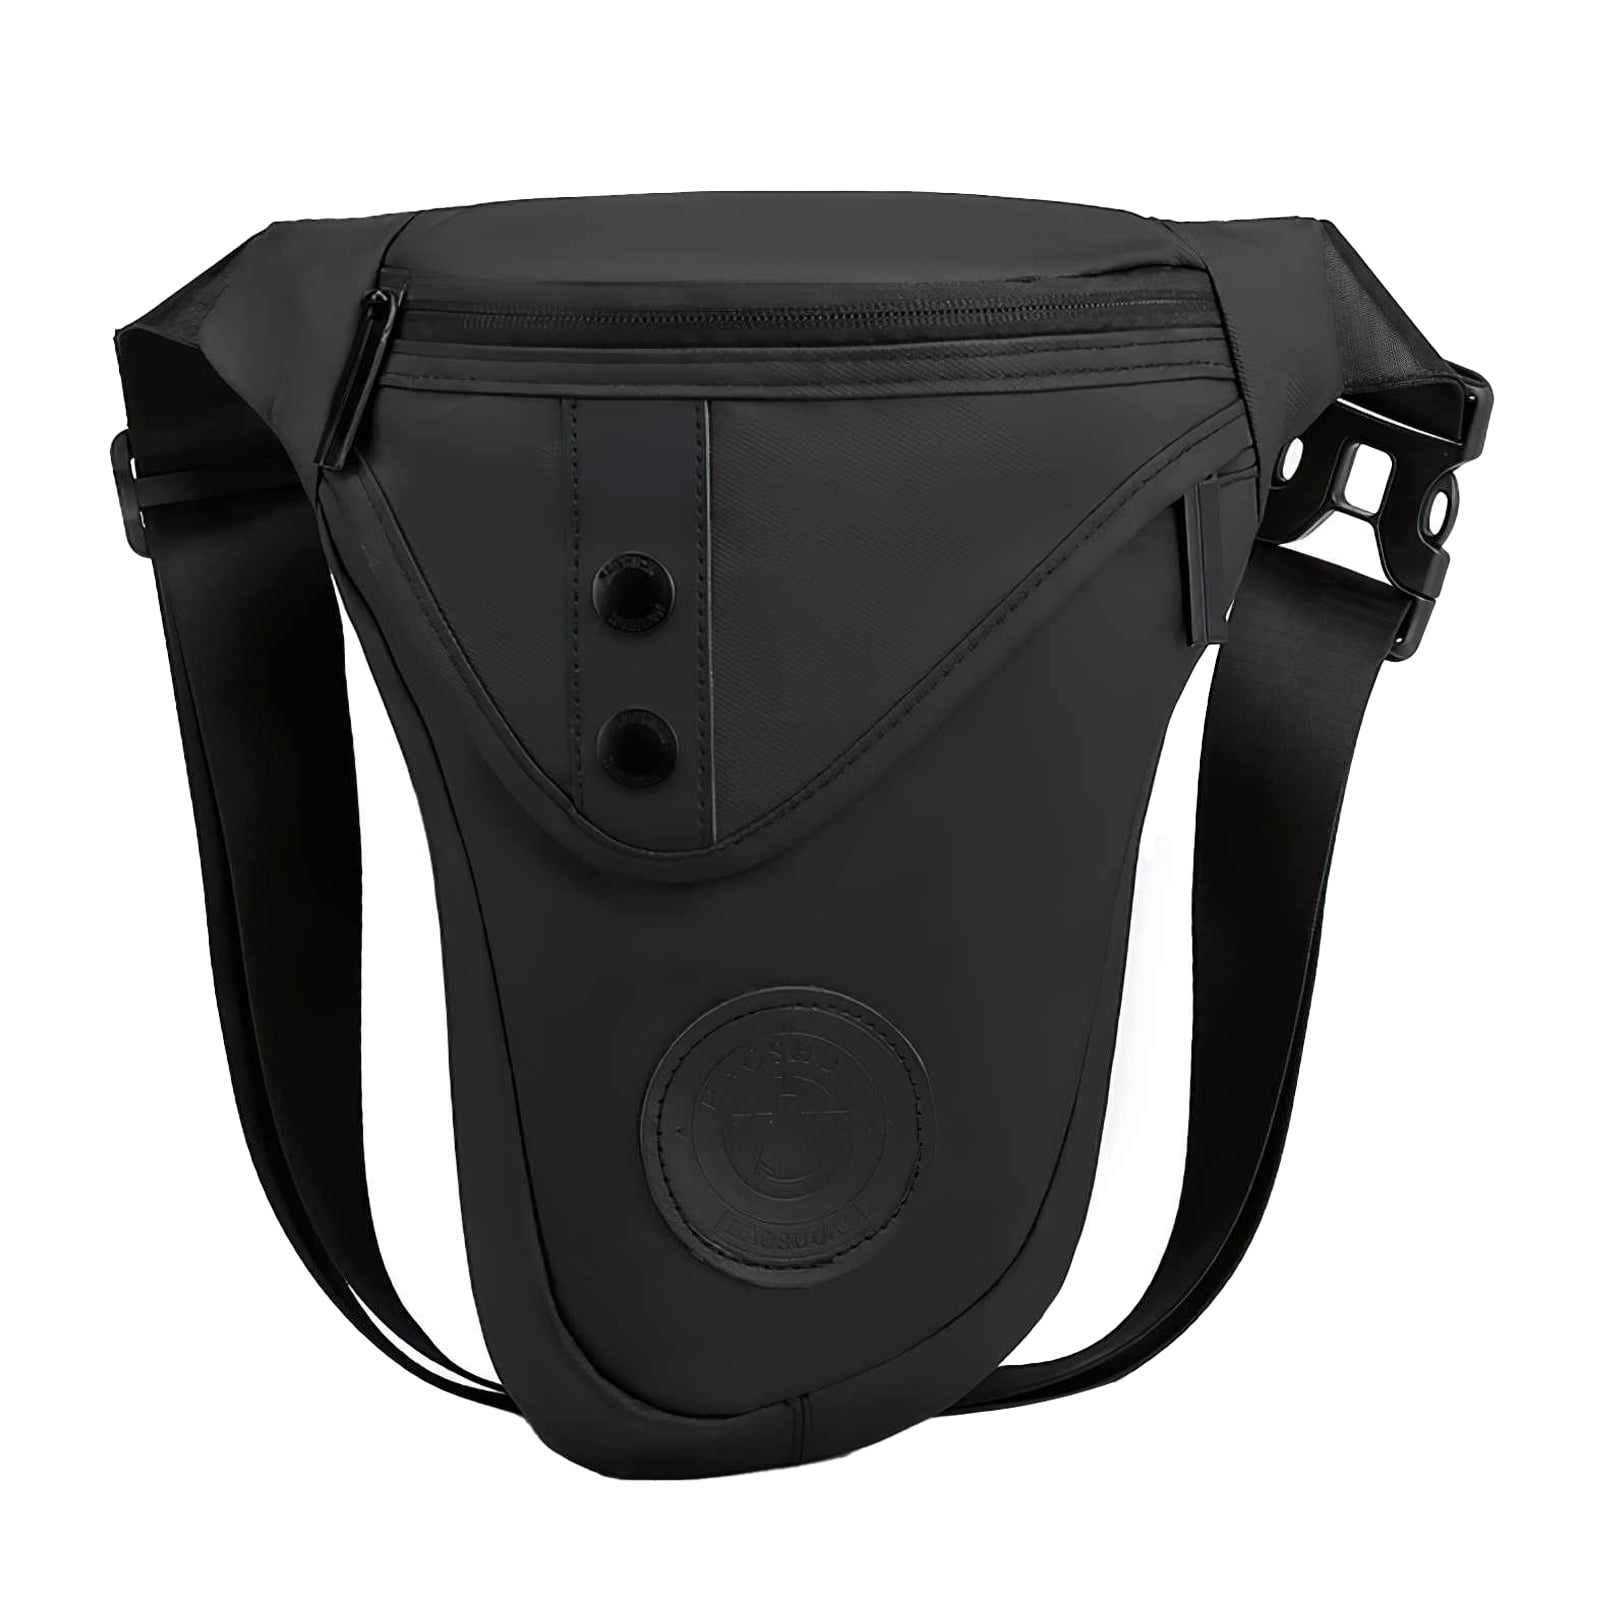 Details about   Tecnica Waist Bag Unique Outdoor Practical Comfortable Cycling Sporty BRAND NEW 